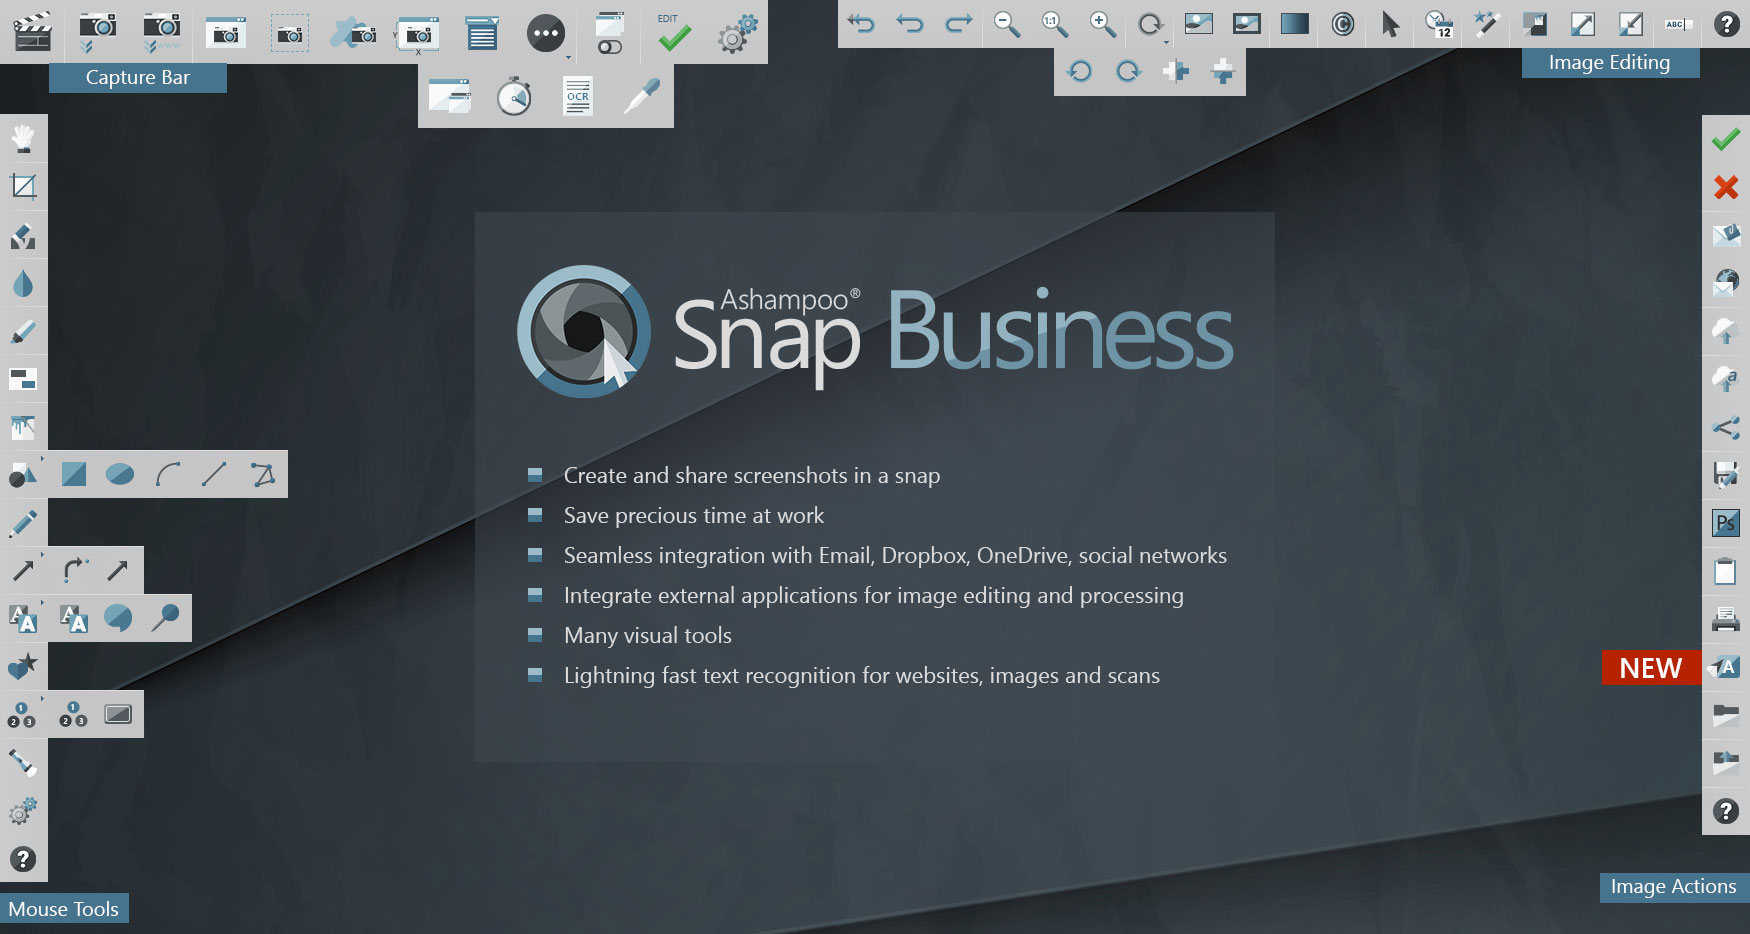 Ashampoo Snap Business 9.0.2 Multilingual Scr_ashampoo_snap_business_overview_functions_en